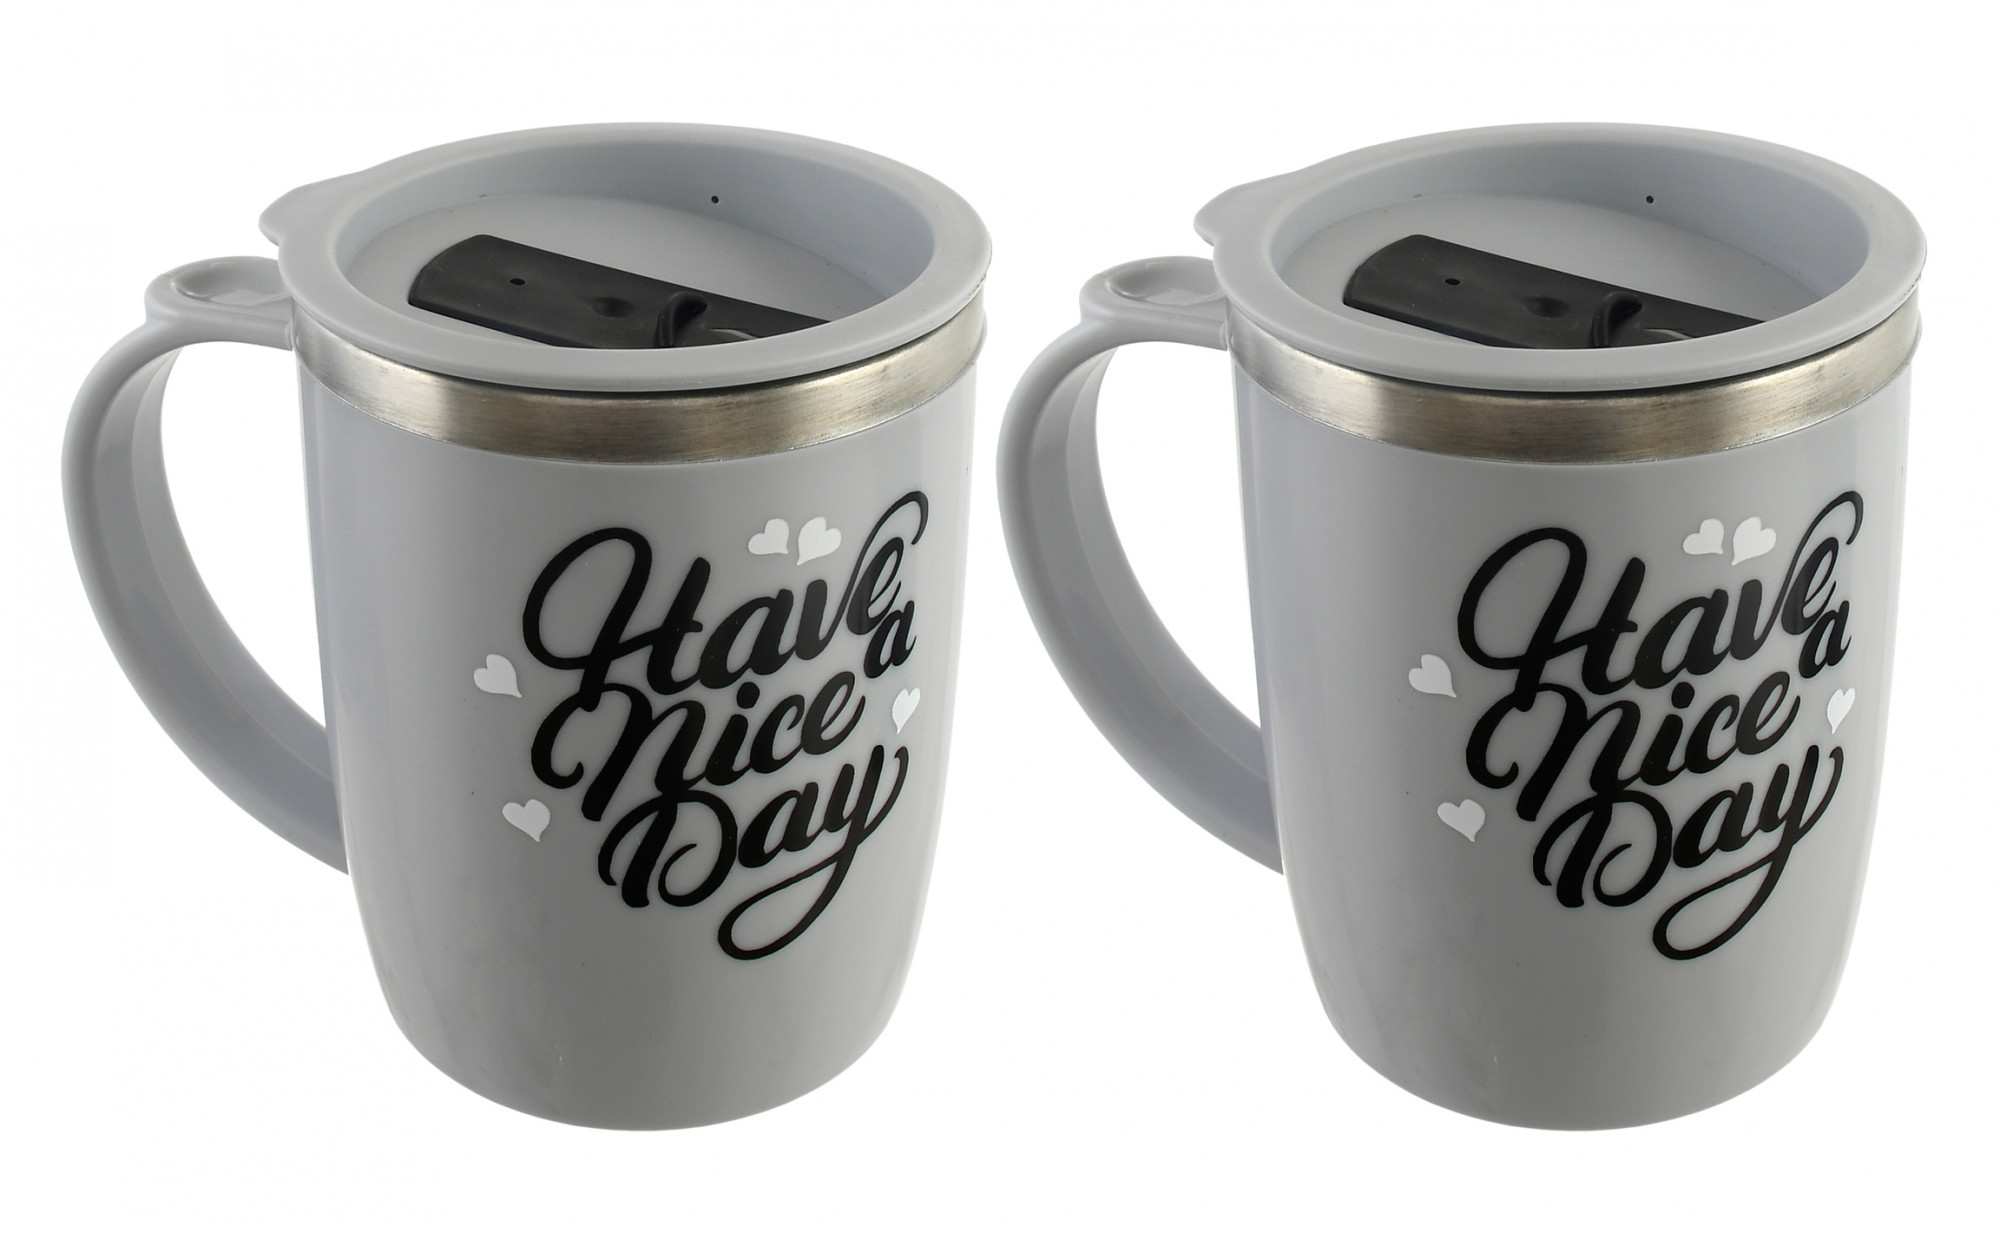 Kuber Industries Have A Nice Day Unicorn  Tea Coffee Time Unbreakable hot Insulated Double Wall Stainless Steel Travel Mug With Sipper Lid (Set Of 2,Grey)